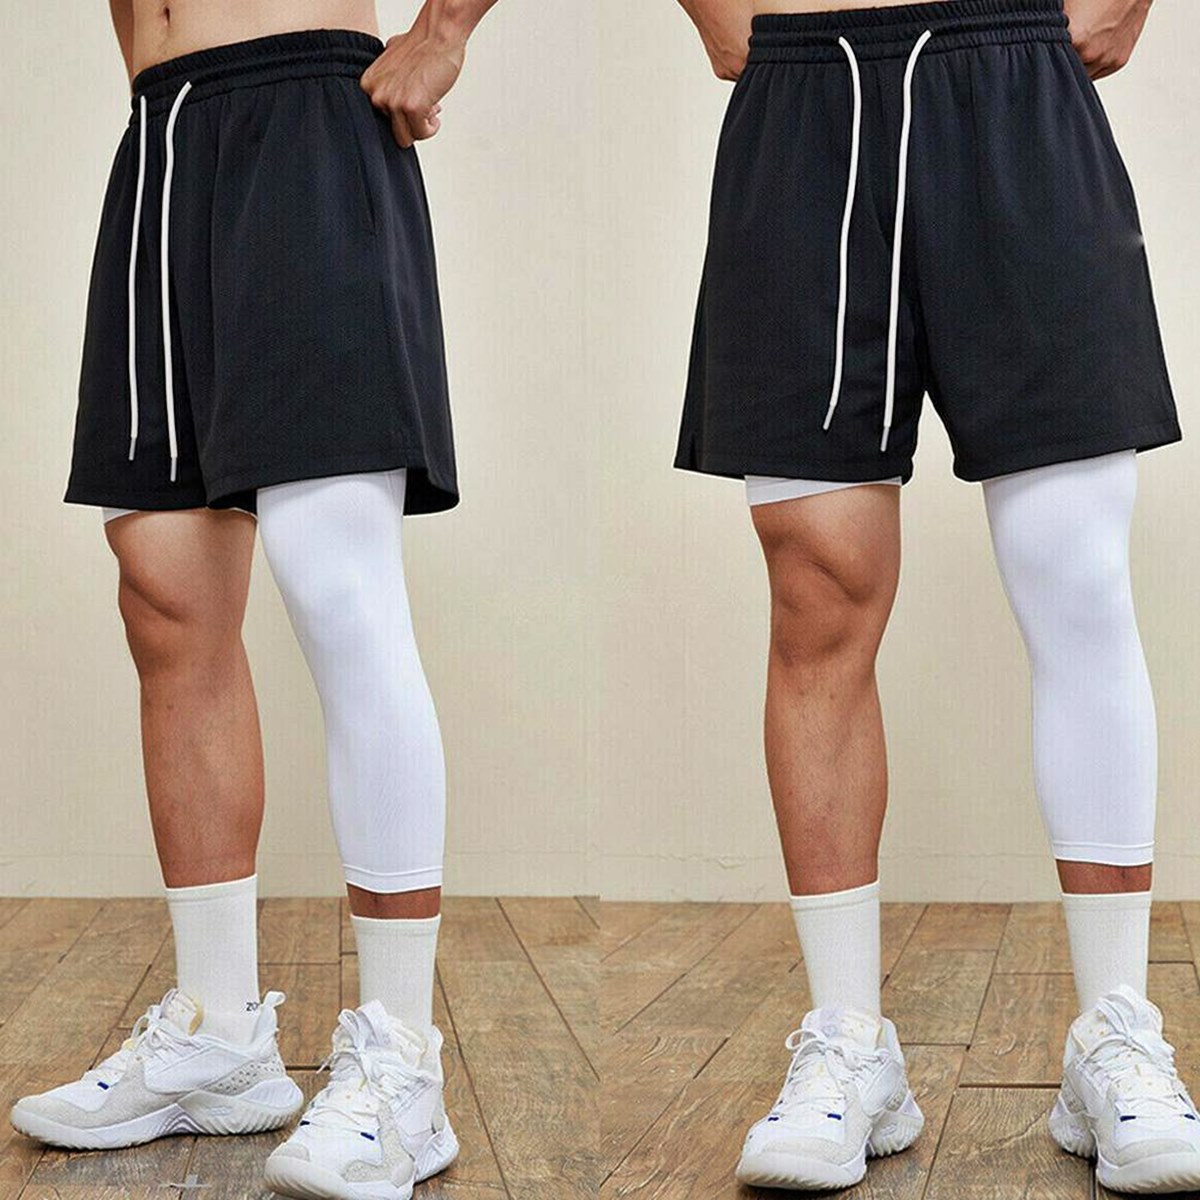 9 Incredible Basketball Compression Shorts For 2023